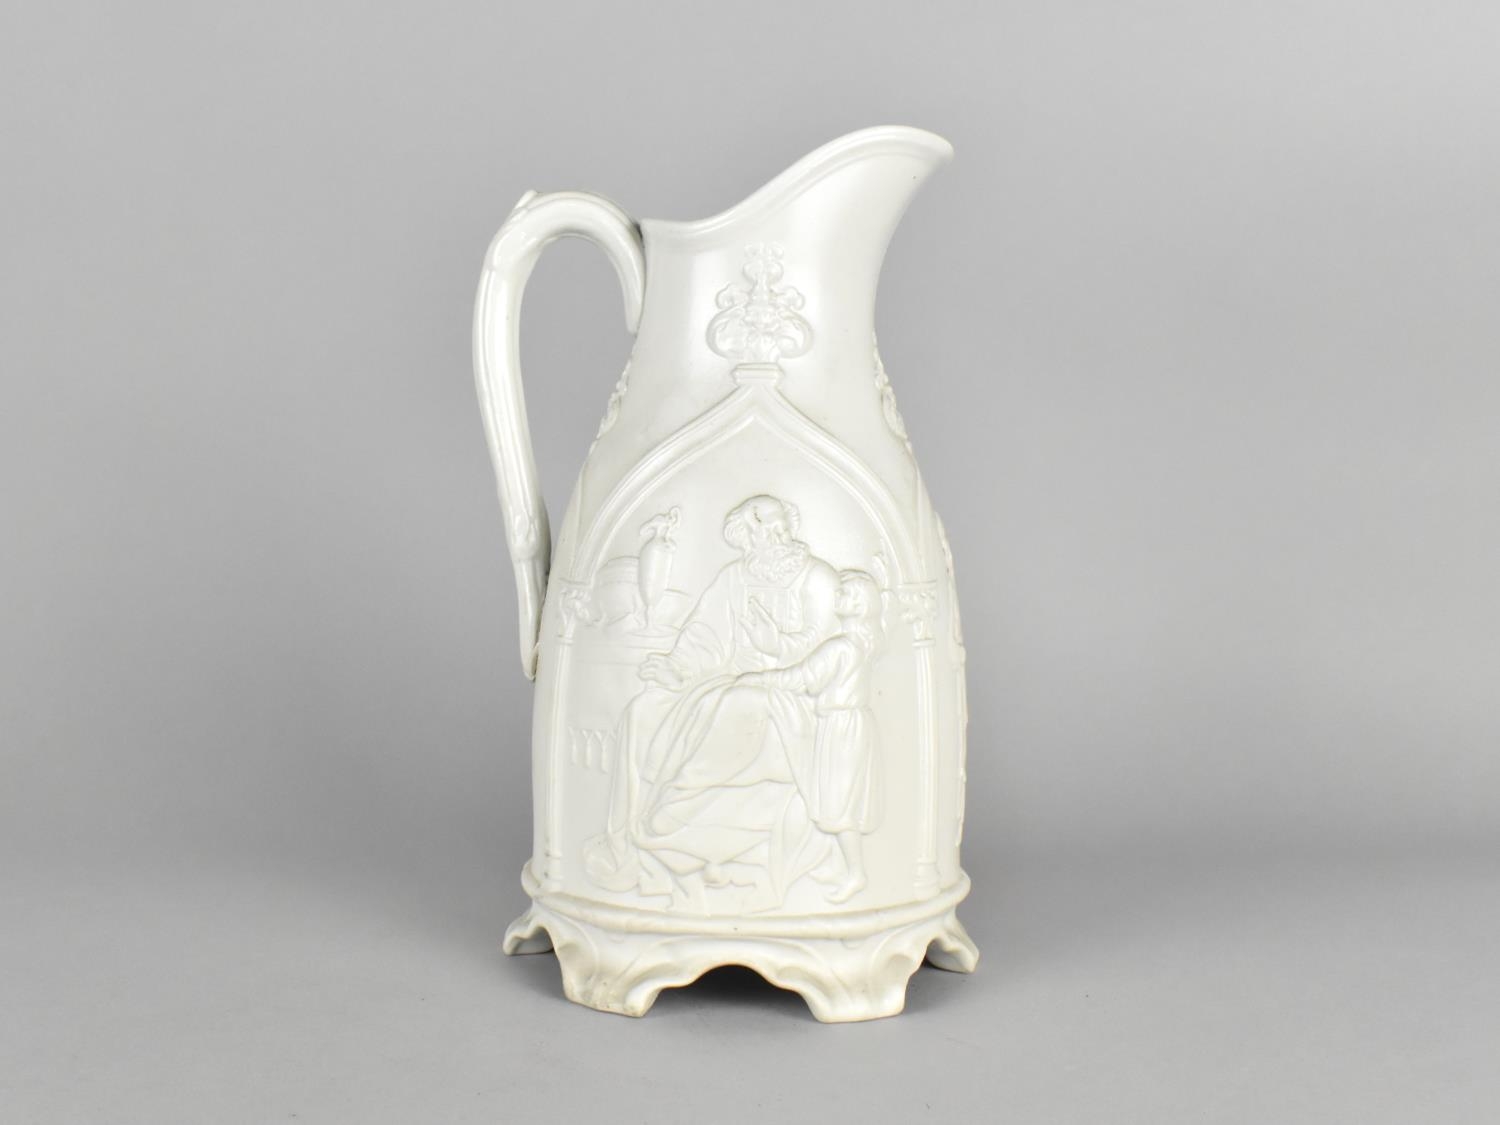 A 19th Century Relief Jug Decorated with Figures, 22.5cm high